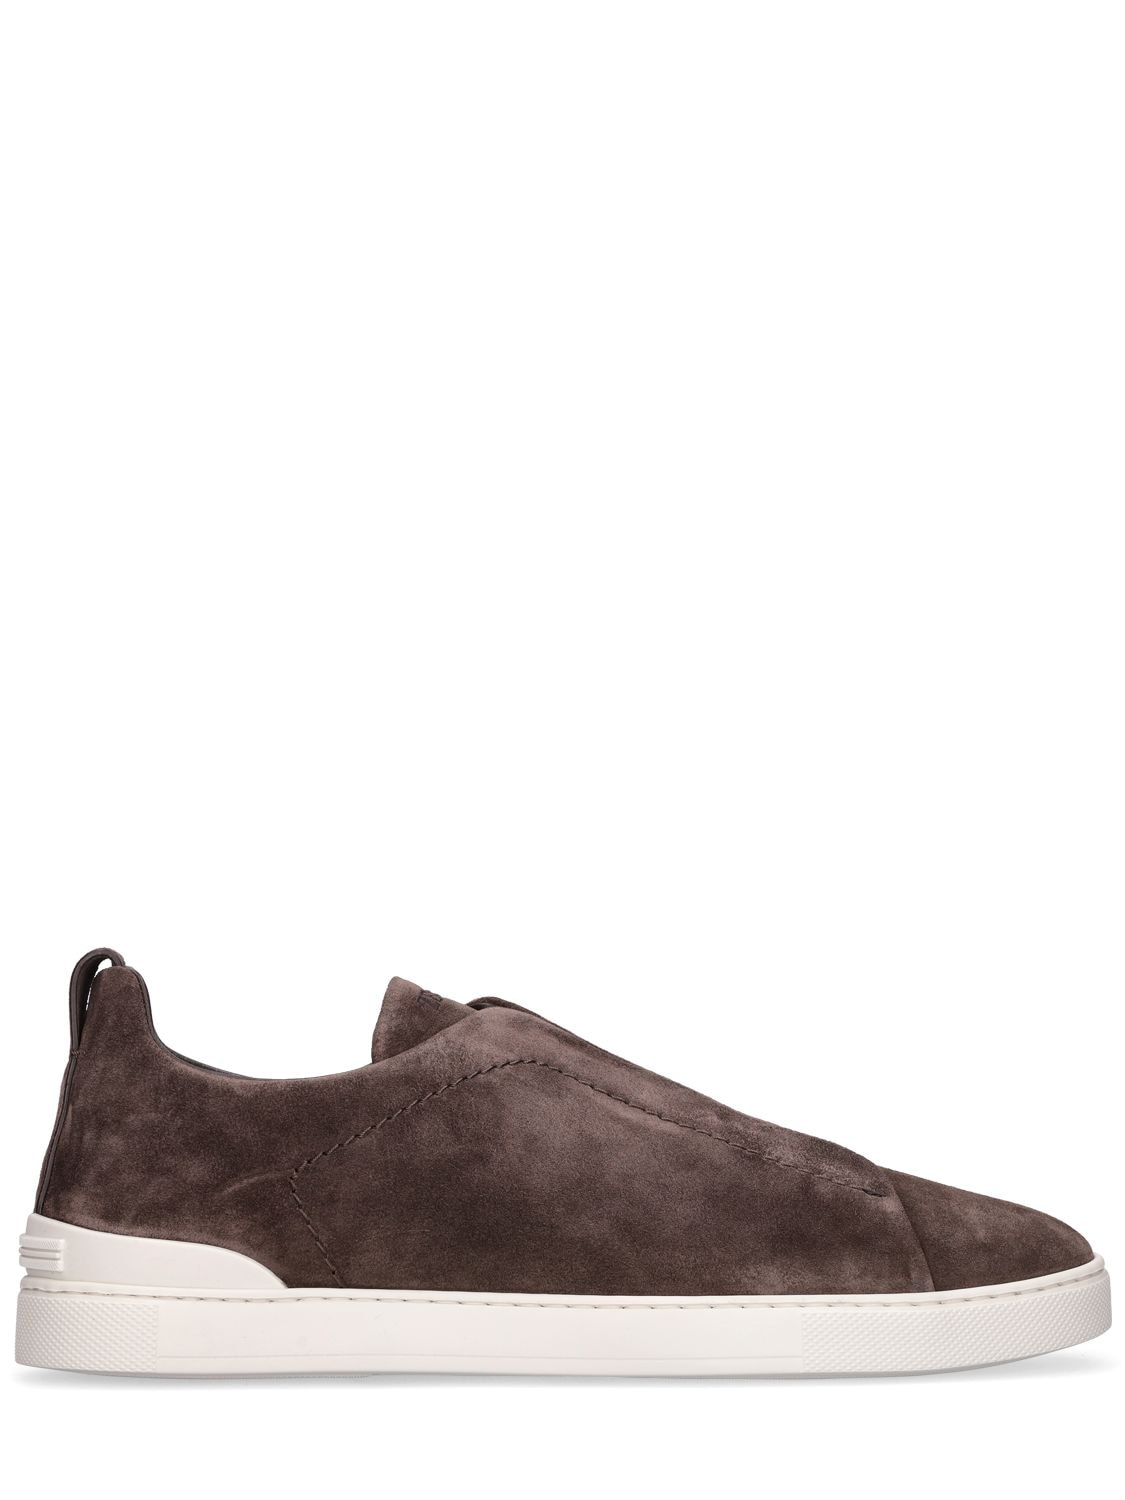 Zegna Triple Stitch Leather Low-top Sneakers In Brown